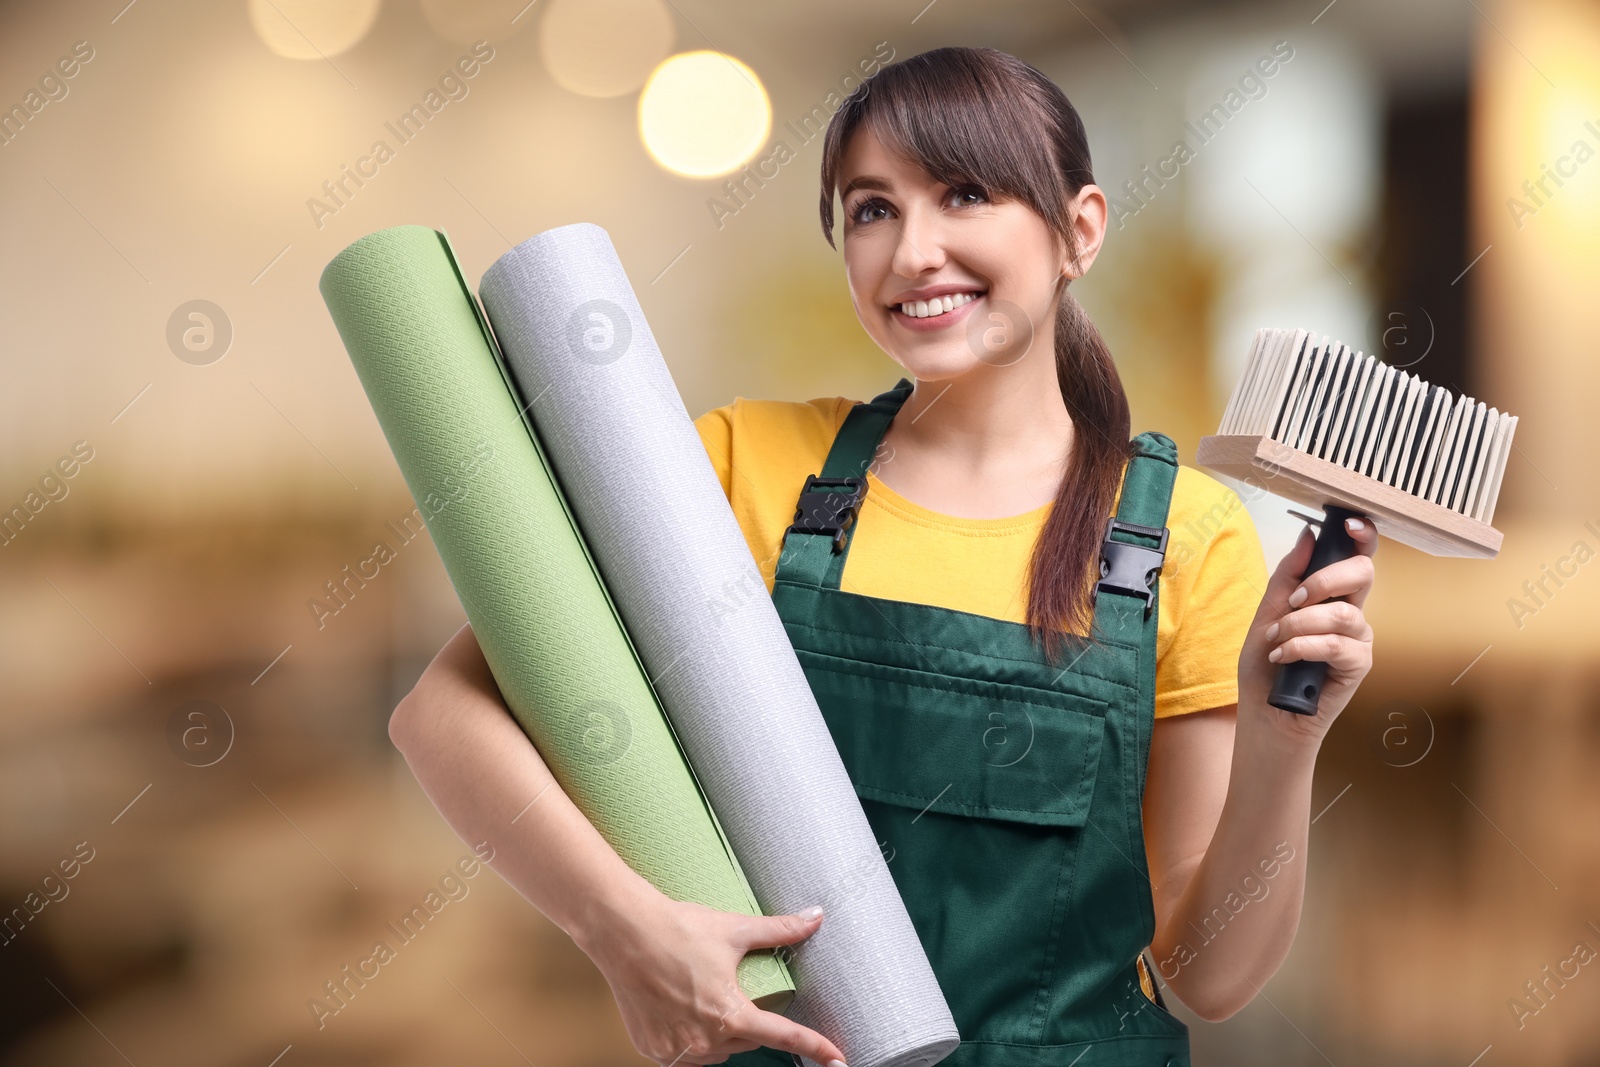 Image of Woman with wallpaper rolls and brush on blurred background